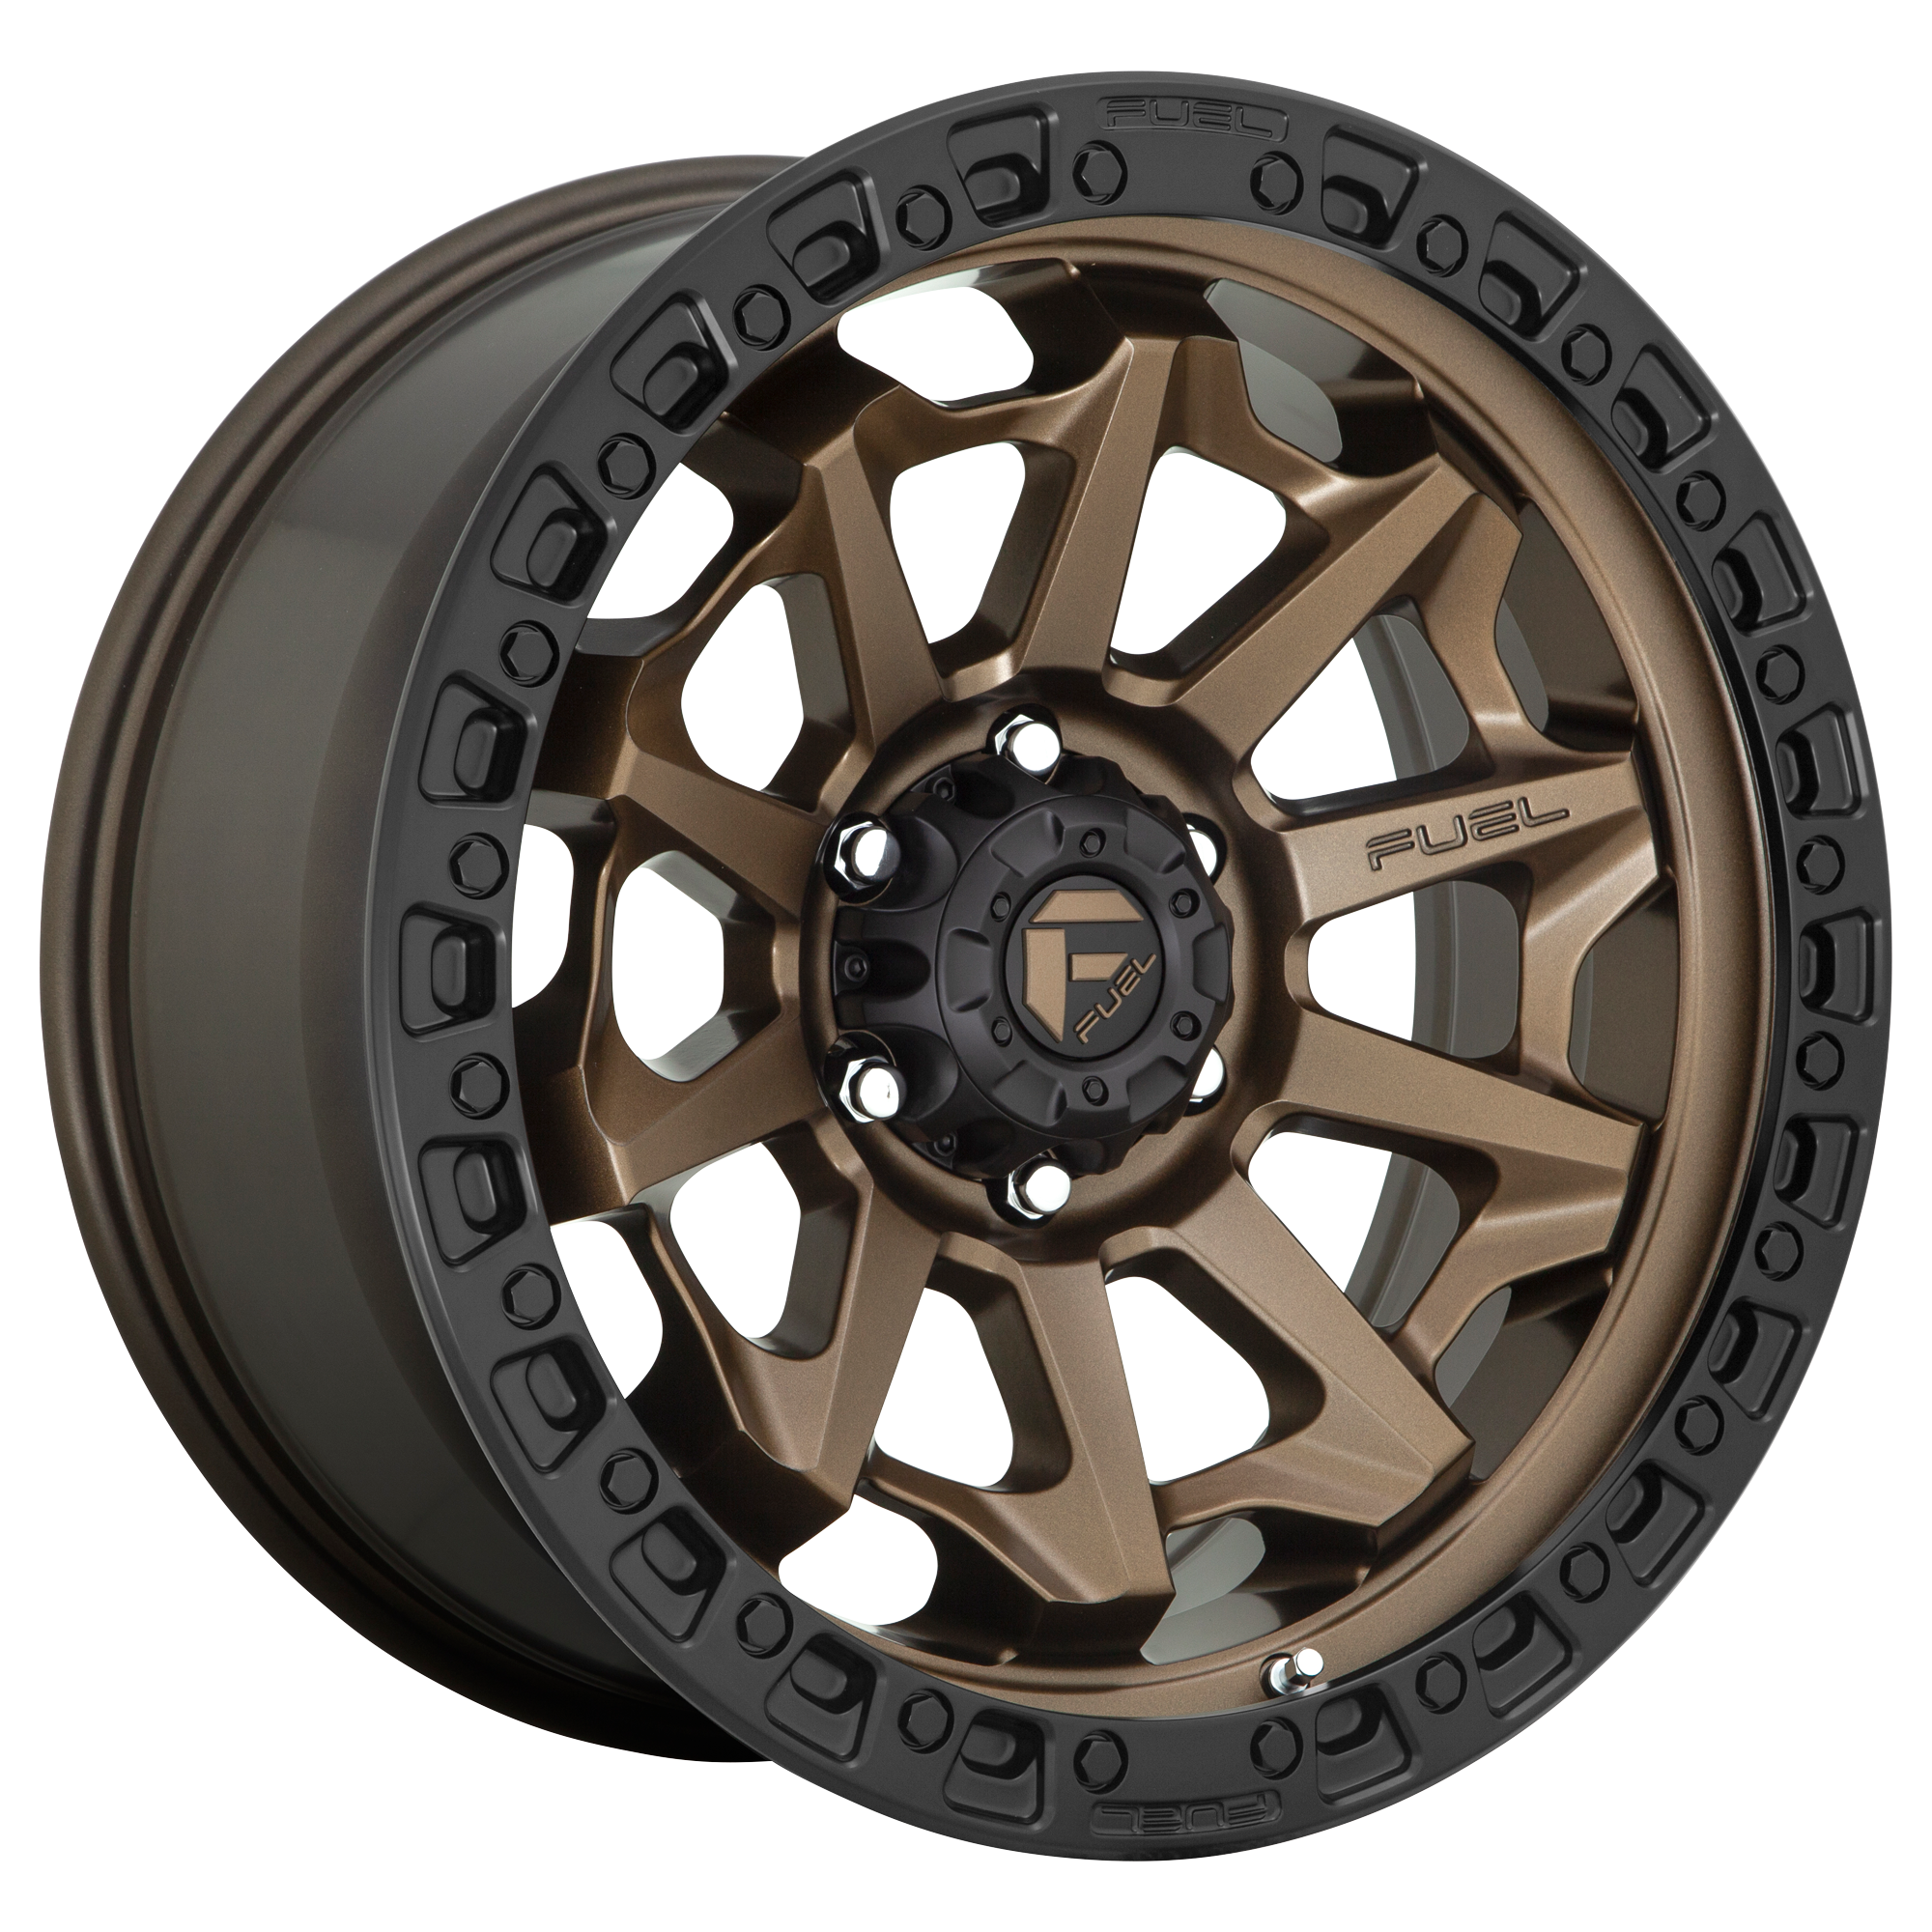 COVERT 20x9 8x165.10 MATTE BRONZE BLACK BEAD RING (1 mm) - Tires and Engine Performance